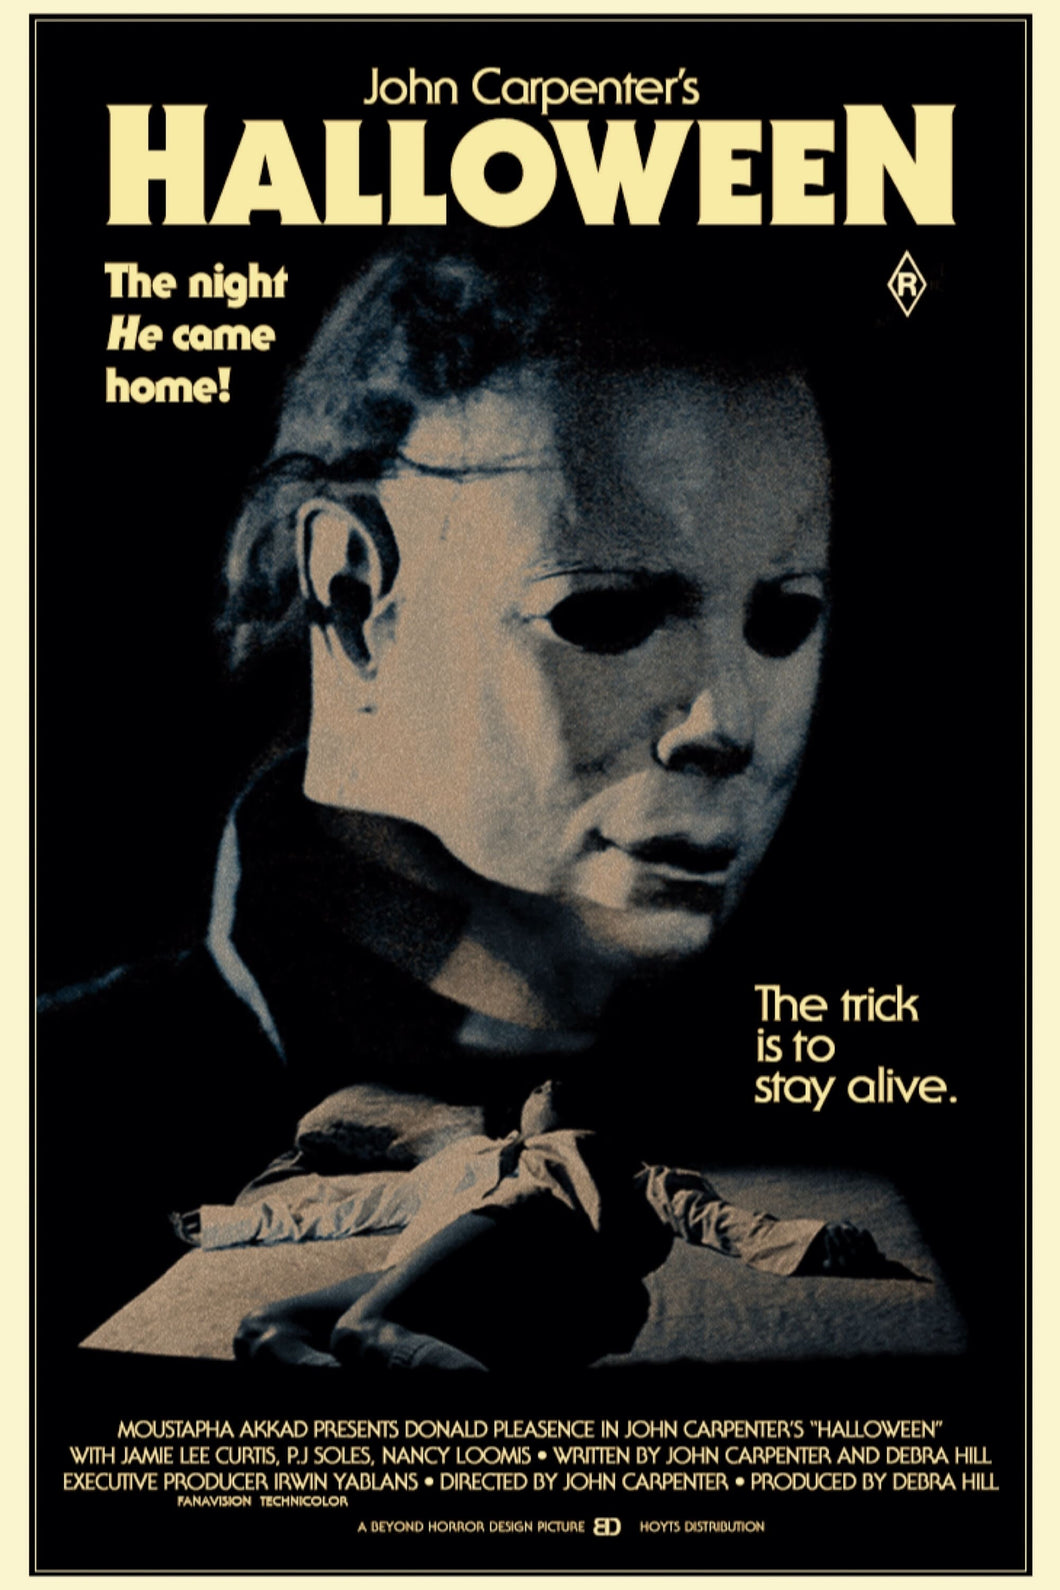 Halloween (1978)v3  Movie Poster High Quality Glossy Paper A1 A2 A3 A4 A3 Framed or Unframed!!!